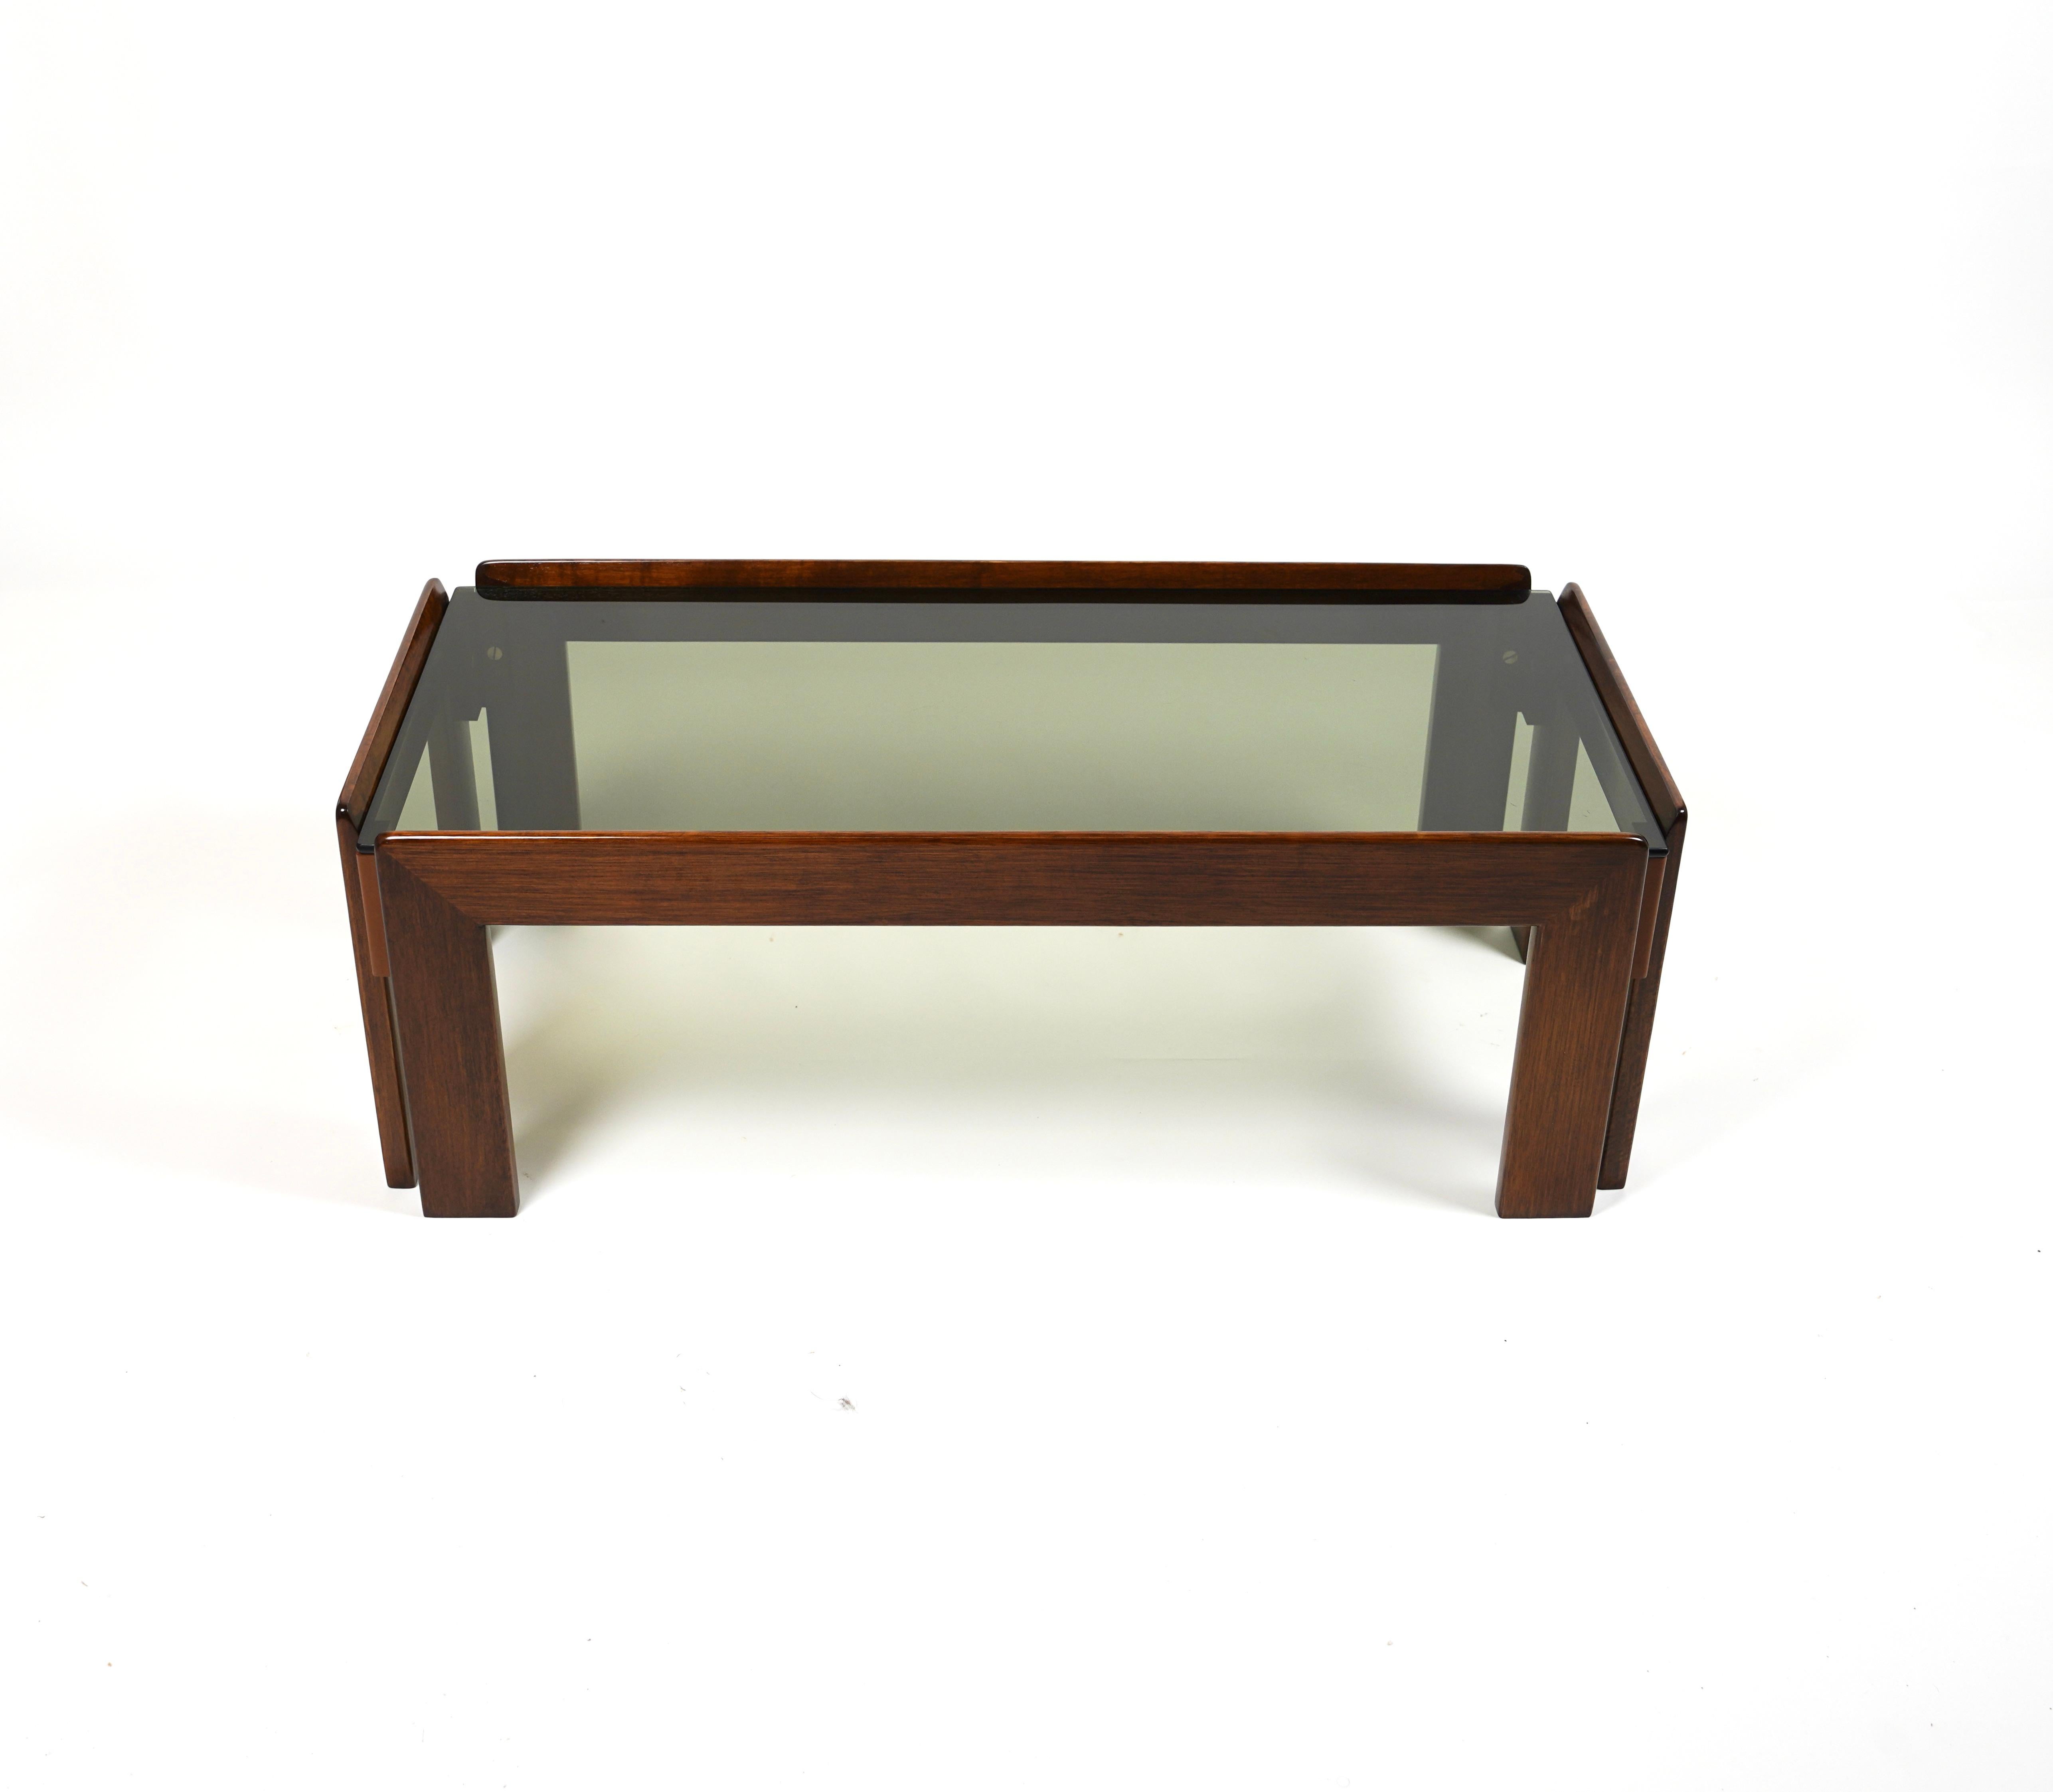 Mid-Century Modern Coffee Table in Wood and Glass Afra & Tobia Scarpa for Cassina, Italy 1960s For Sale